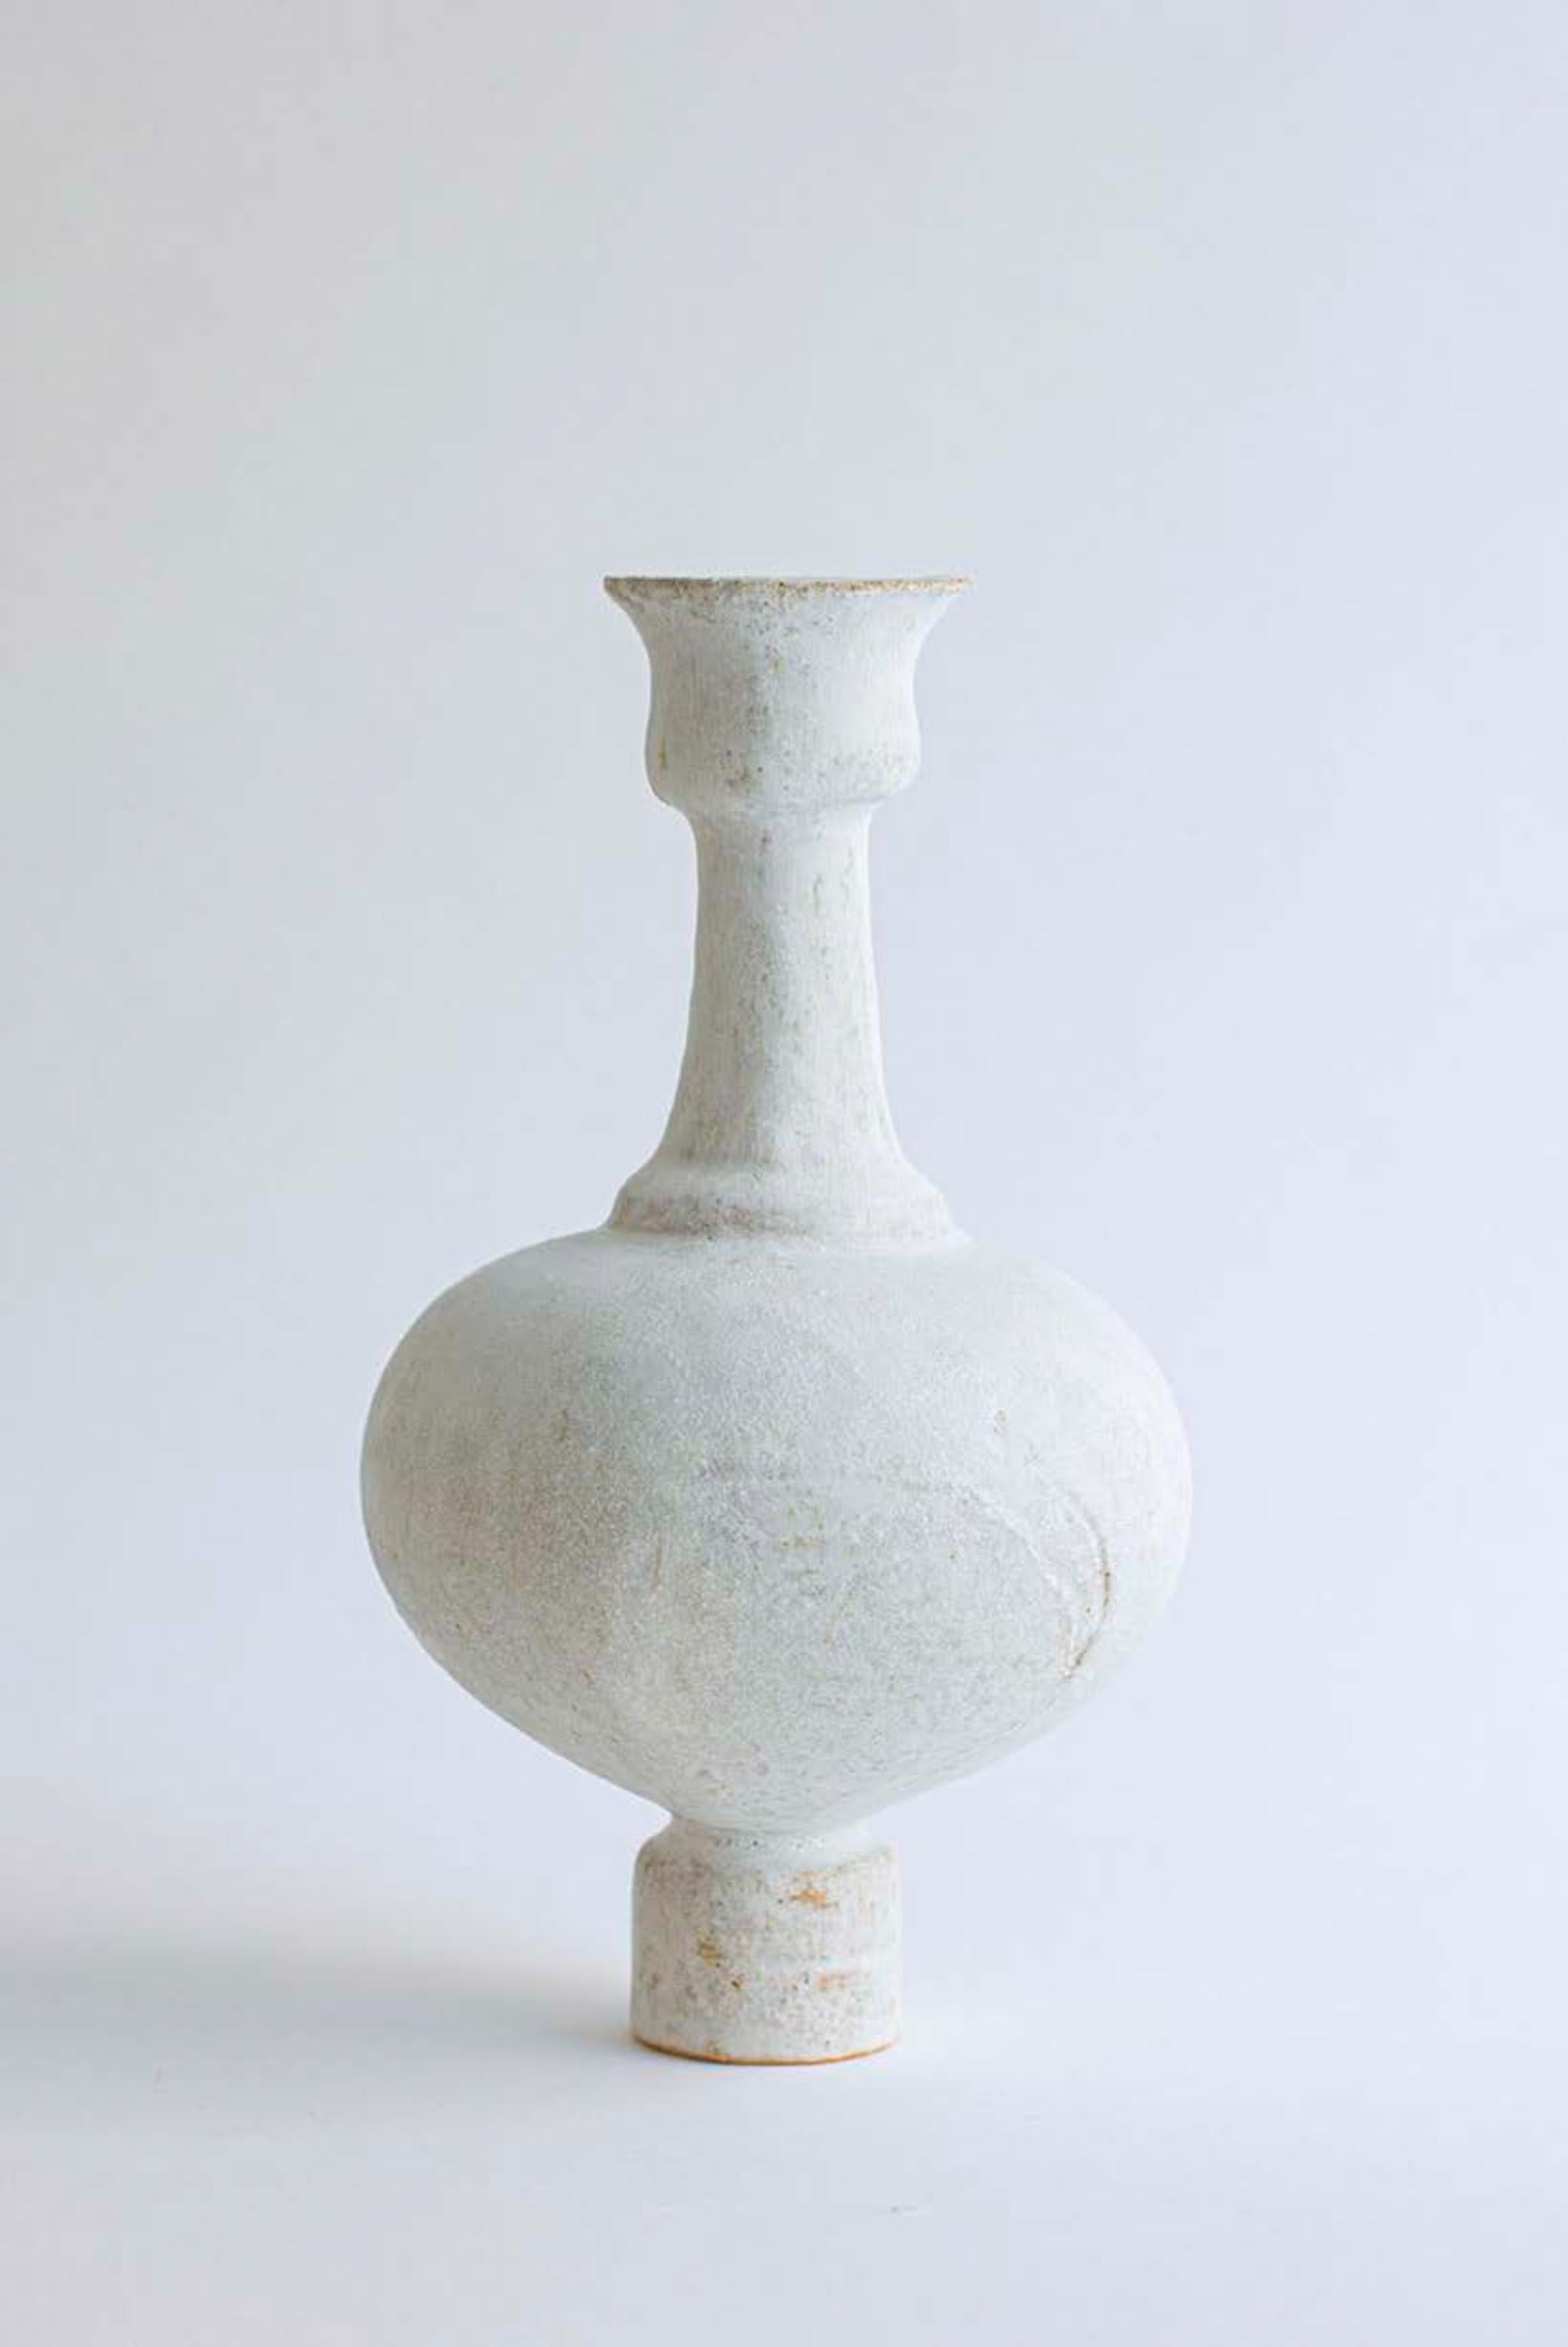 Unique Arq 011 Blanco, Hueso vase by Raquel Vidal and Pedro Paz
Dimensions: Ø 15.5 x 27 cm
Materials: hand-sculpted glazed stoneware.

The Arq series emerged from our own past production. Drawing its inspiration from the field of archaeology, it